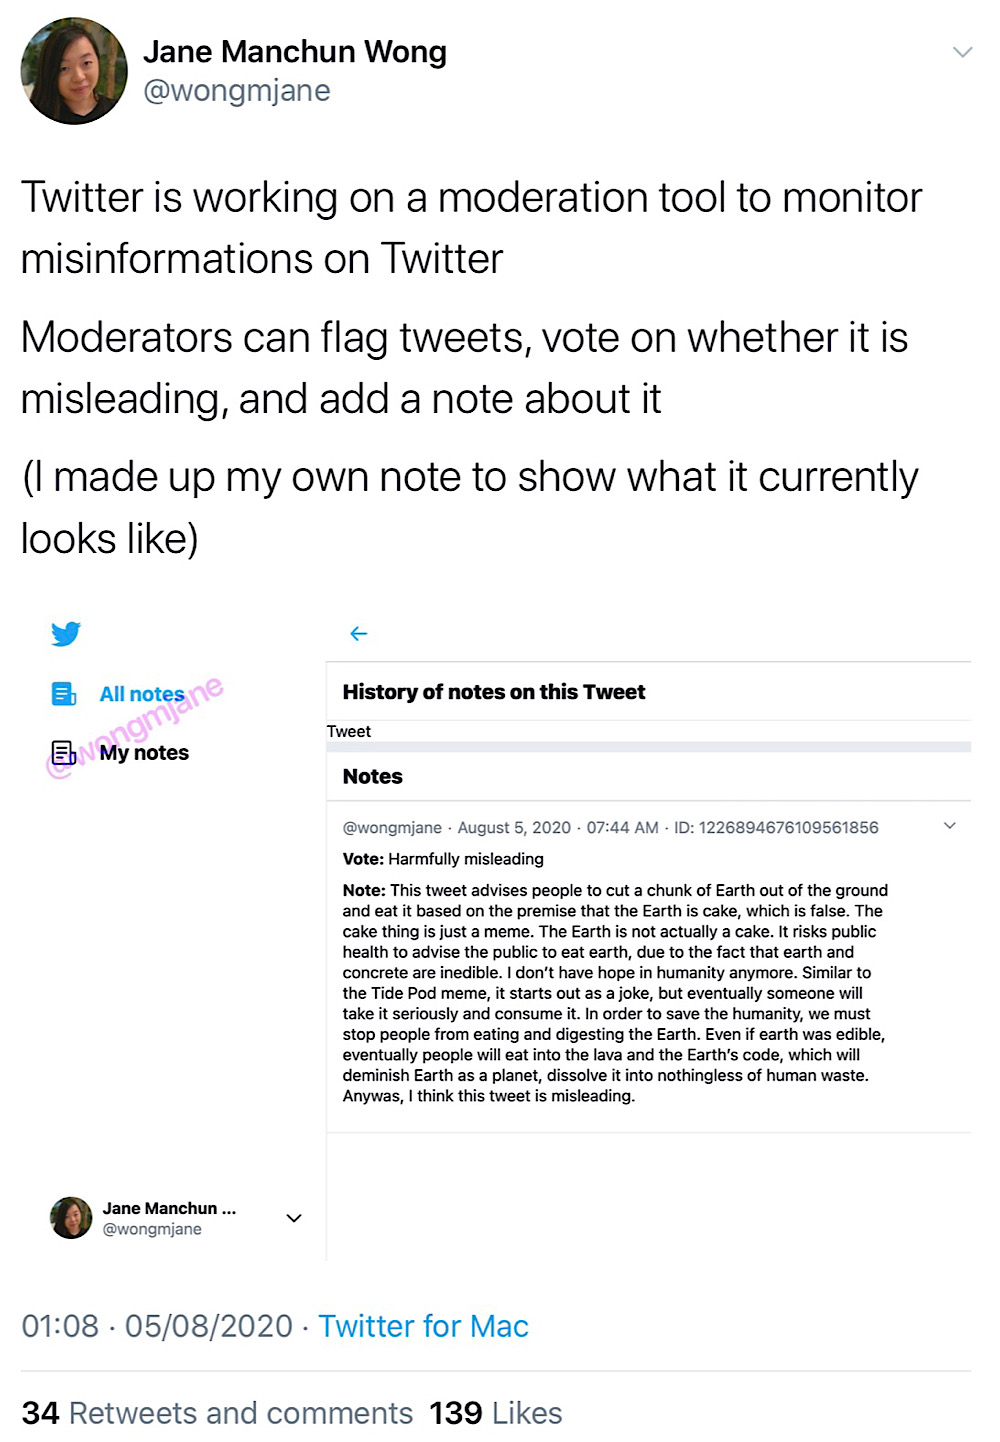 An unreleased Twitter moderation tool shows a panel used by moderators to vote on "harmfully misleading" tweets (@wongmjane)